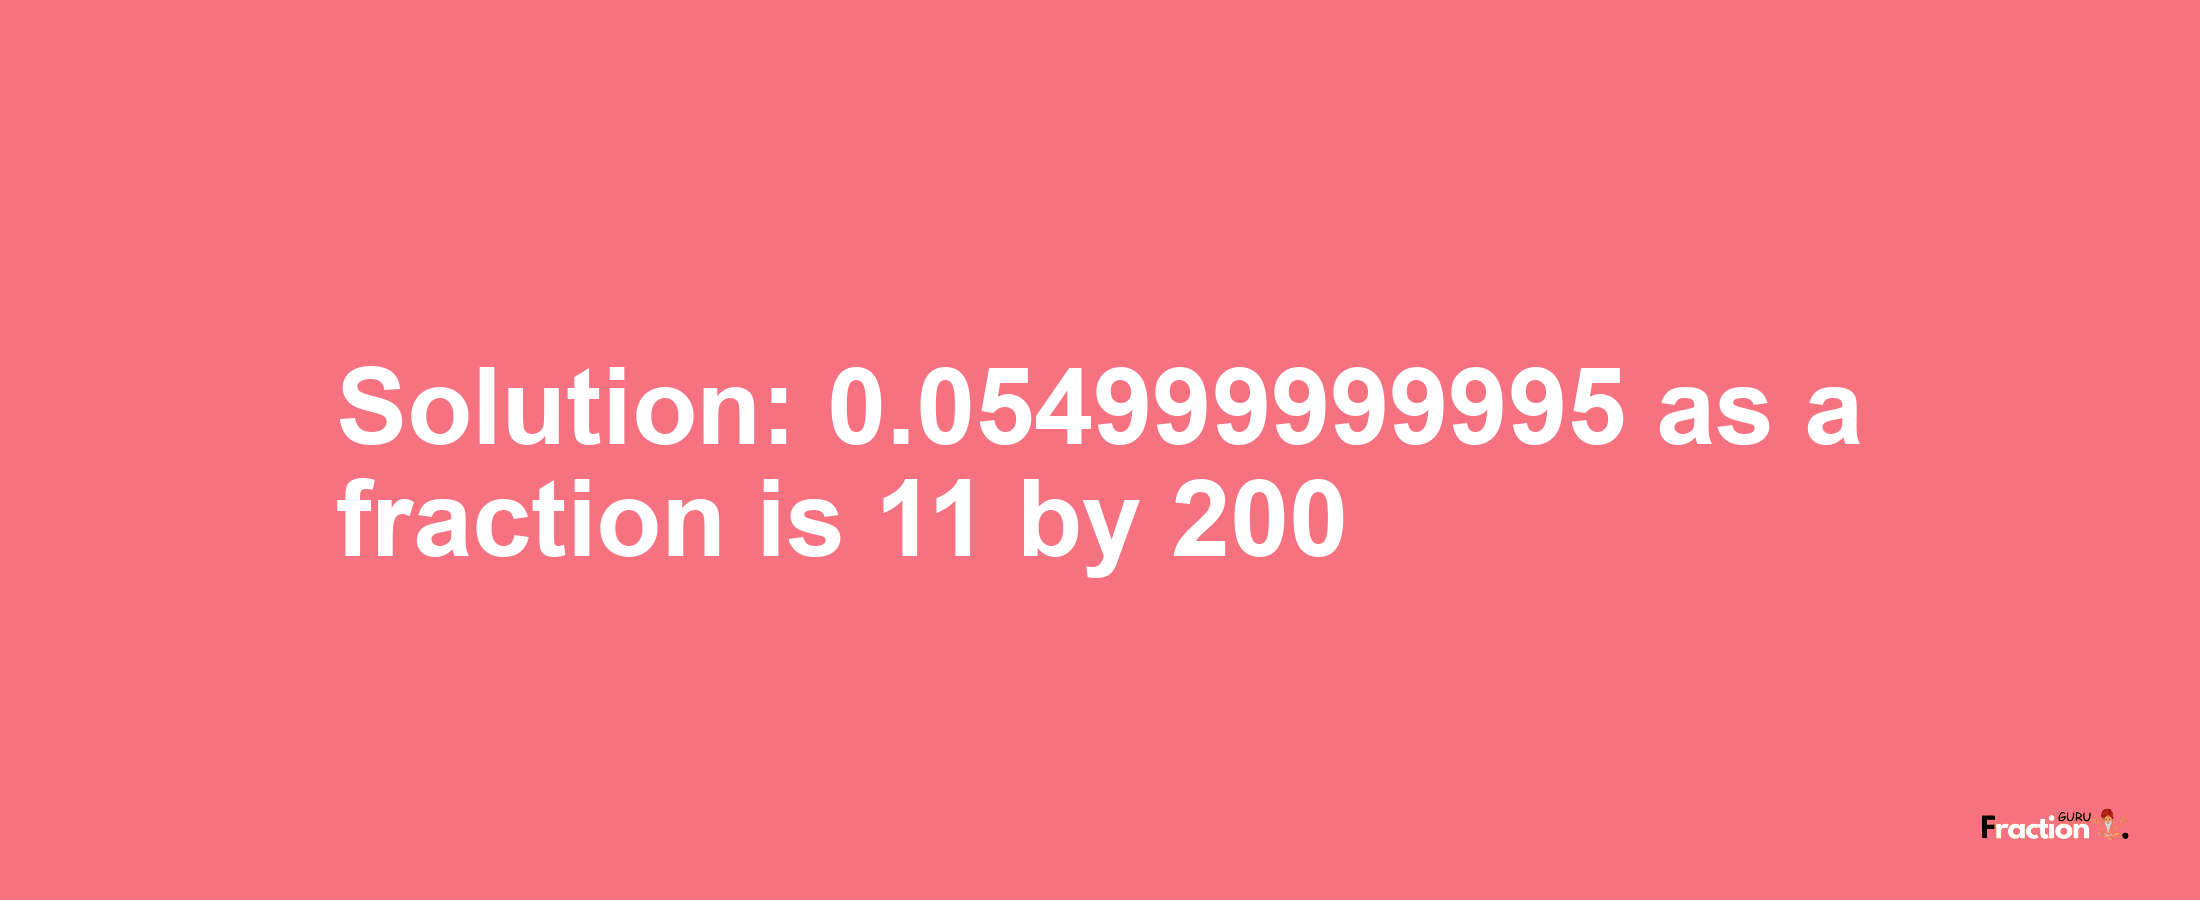 Solution:0.054999999995 as a fraction is 11/200